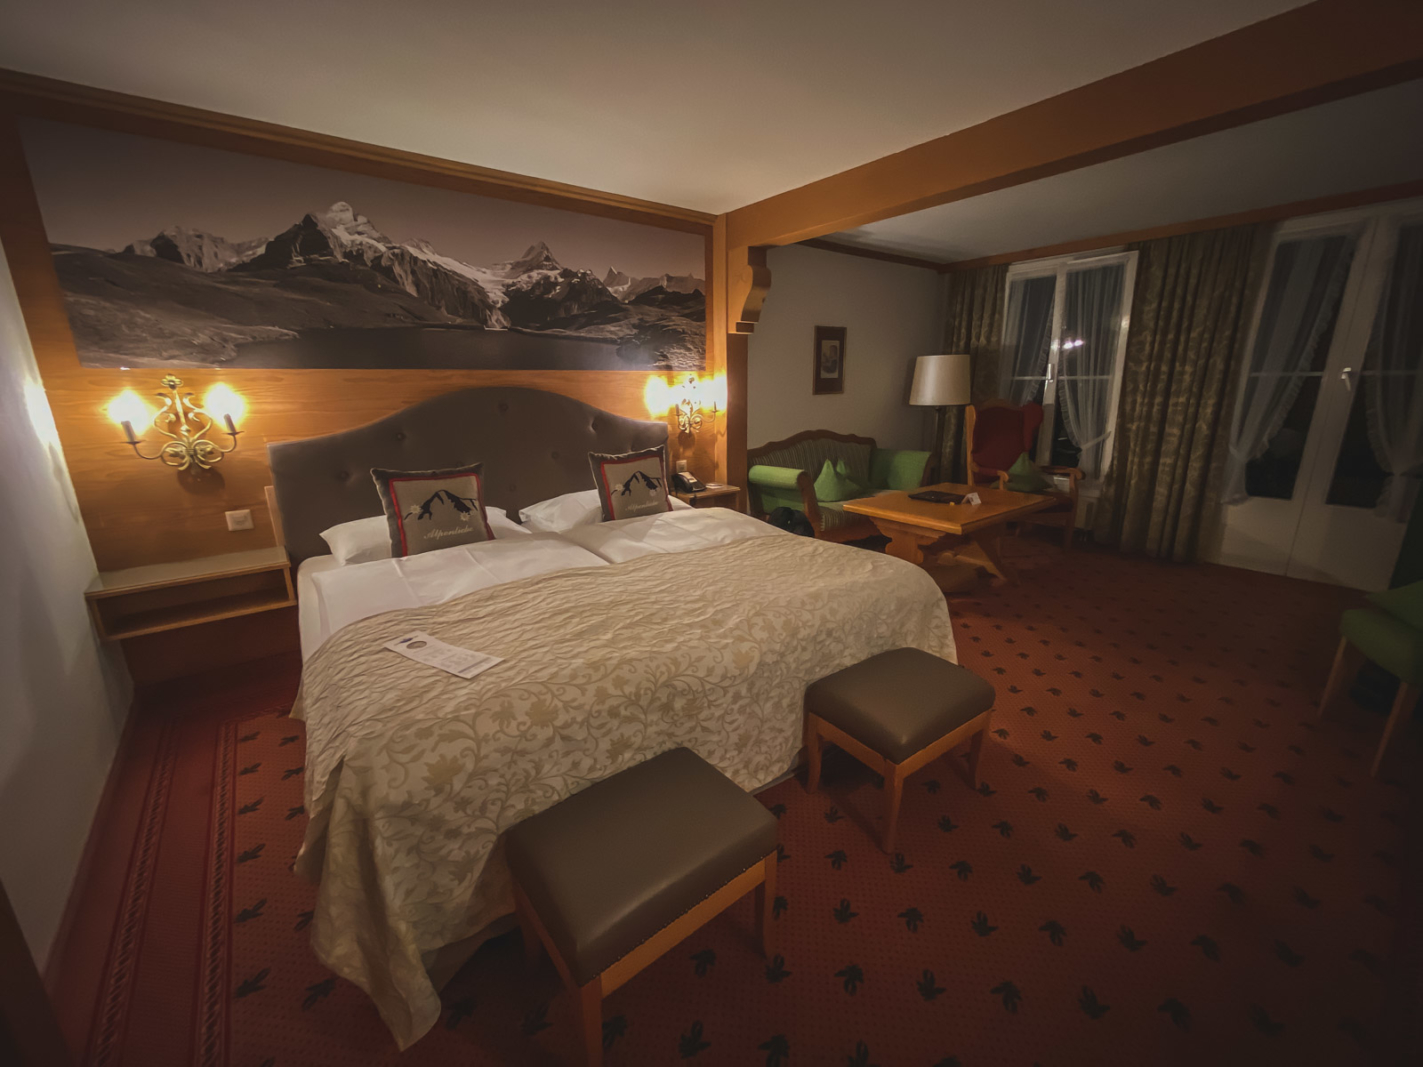 Things to do in Interlaken Accommodation recommendations